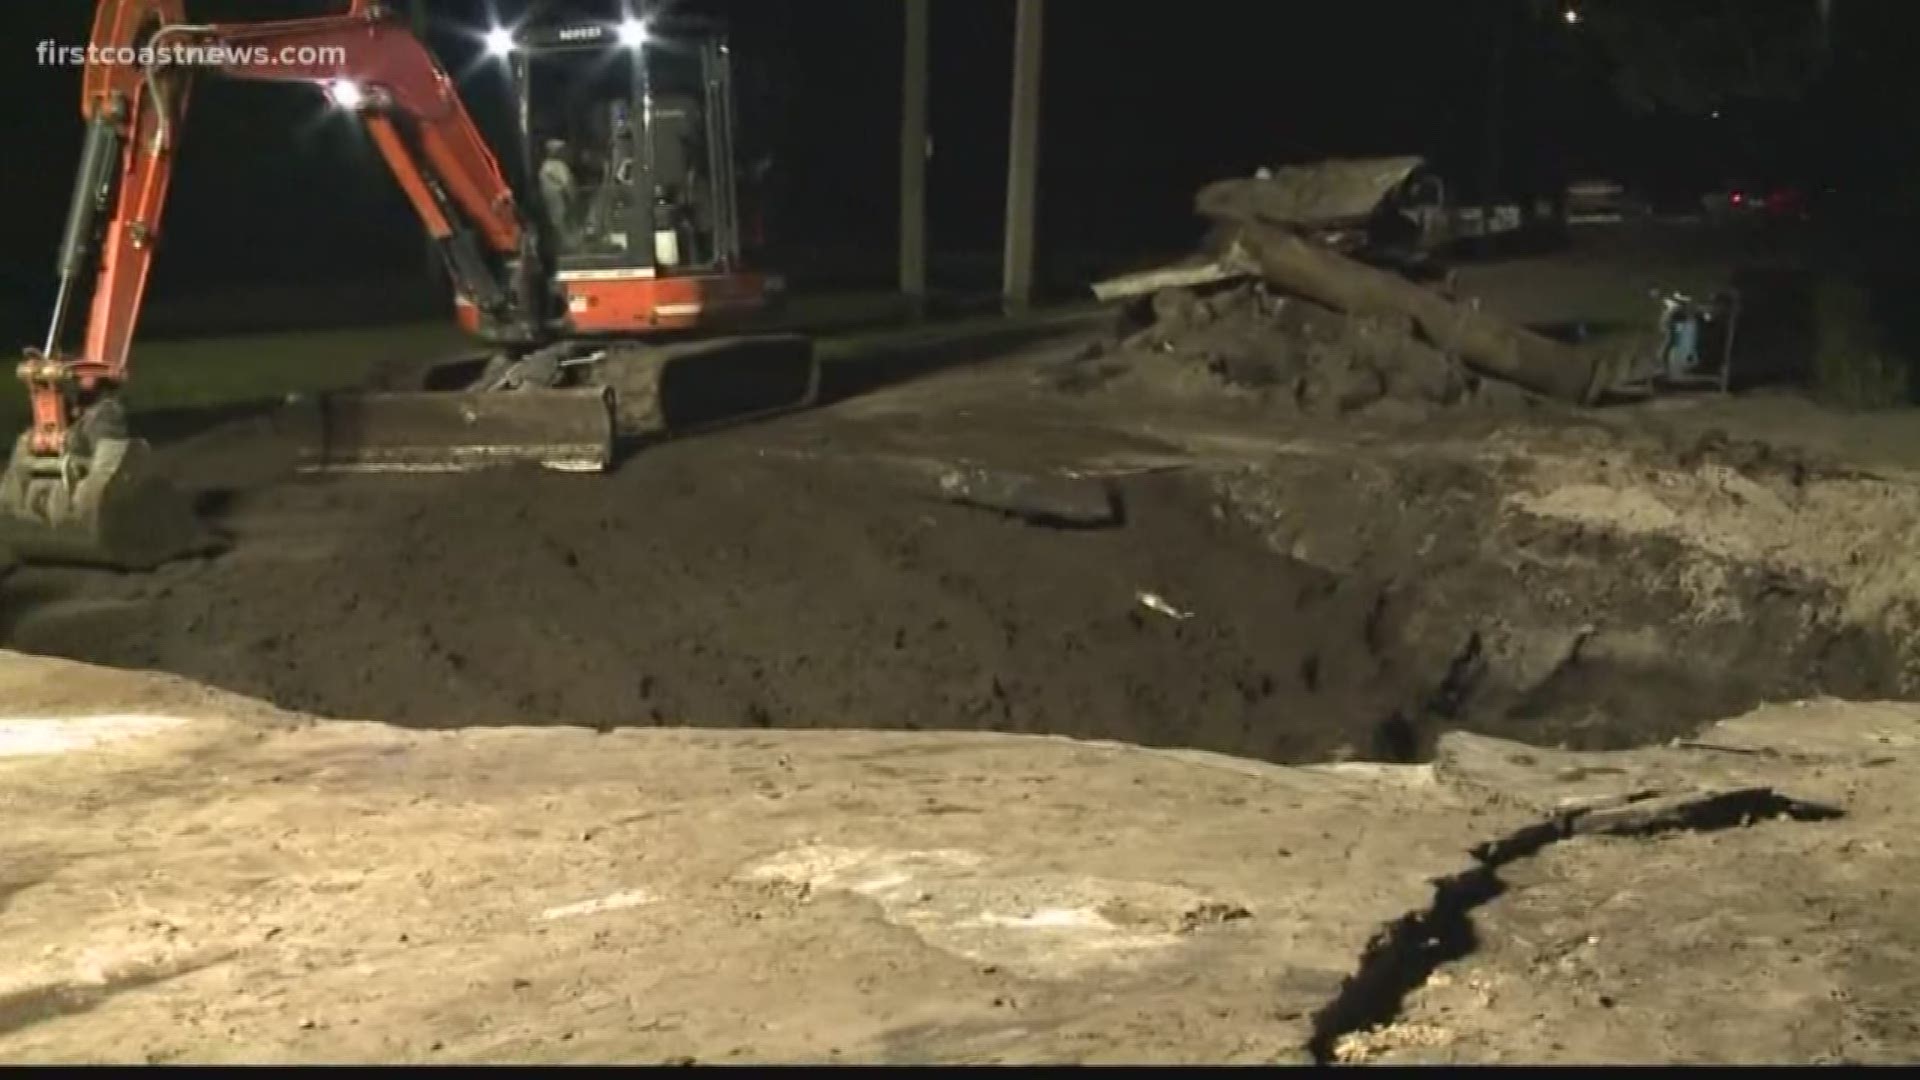 The sinkhole was reported in the 5300 block of 118th Street near Sundown Drive. JEA crews shut down the area as they worked to repair it through the night.